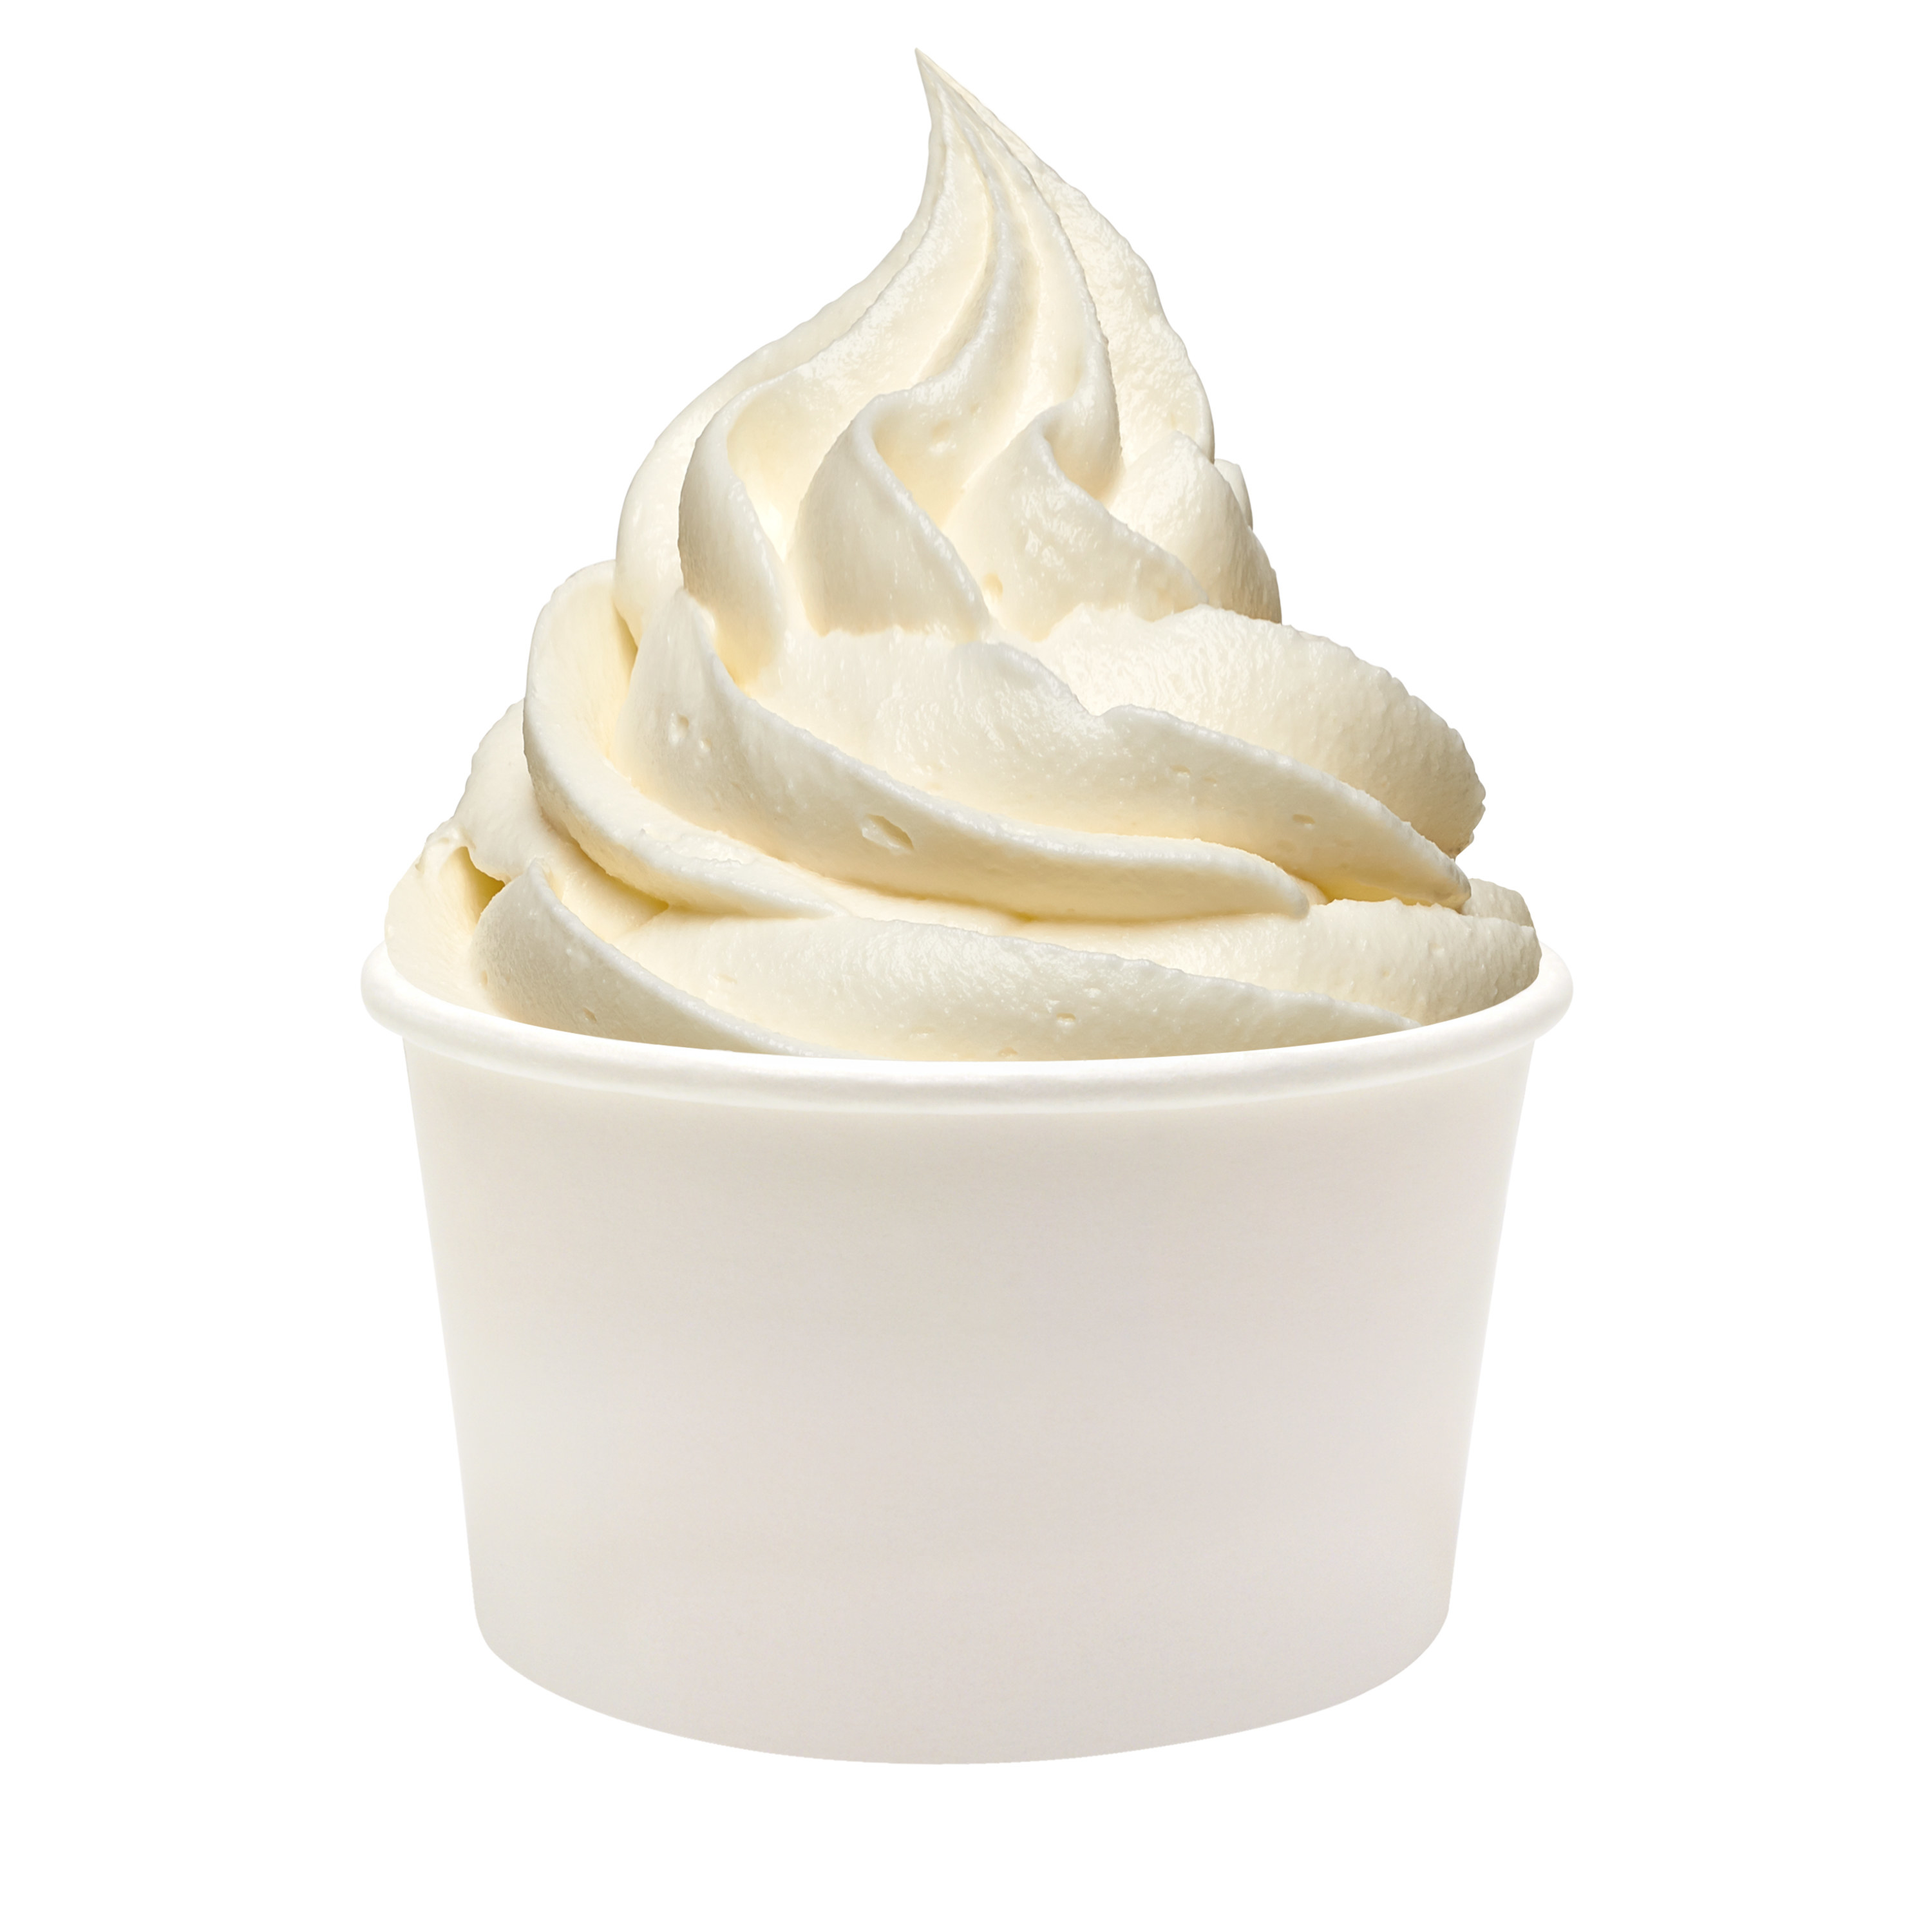 Stock photo of frozen yogurt in a paper container 